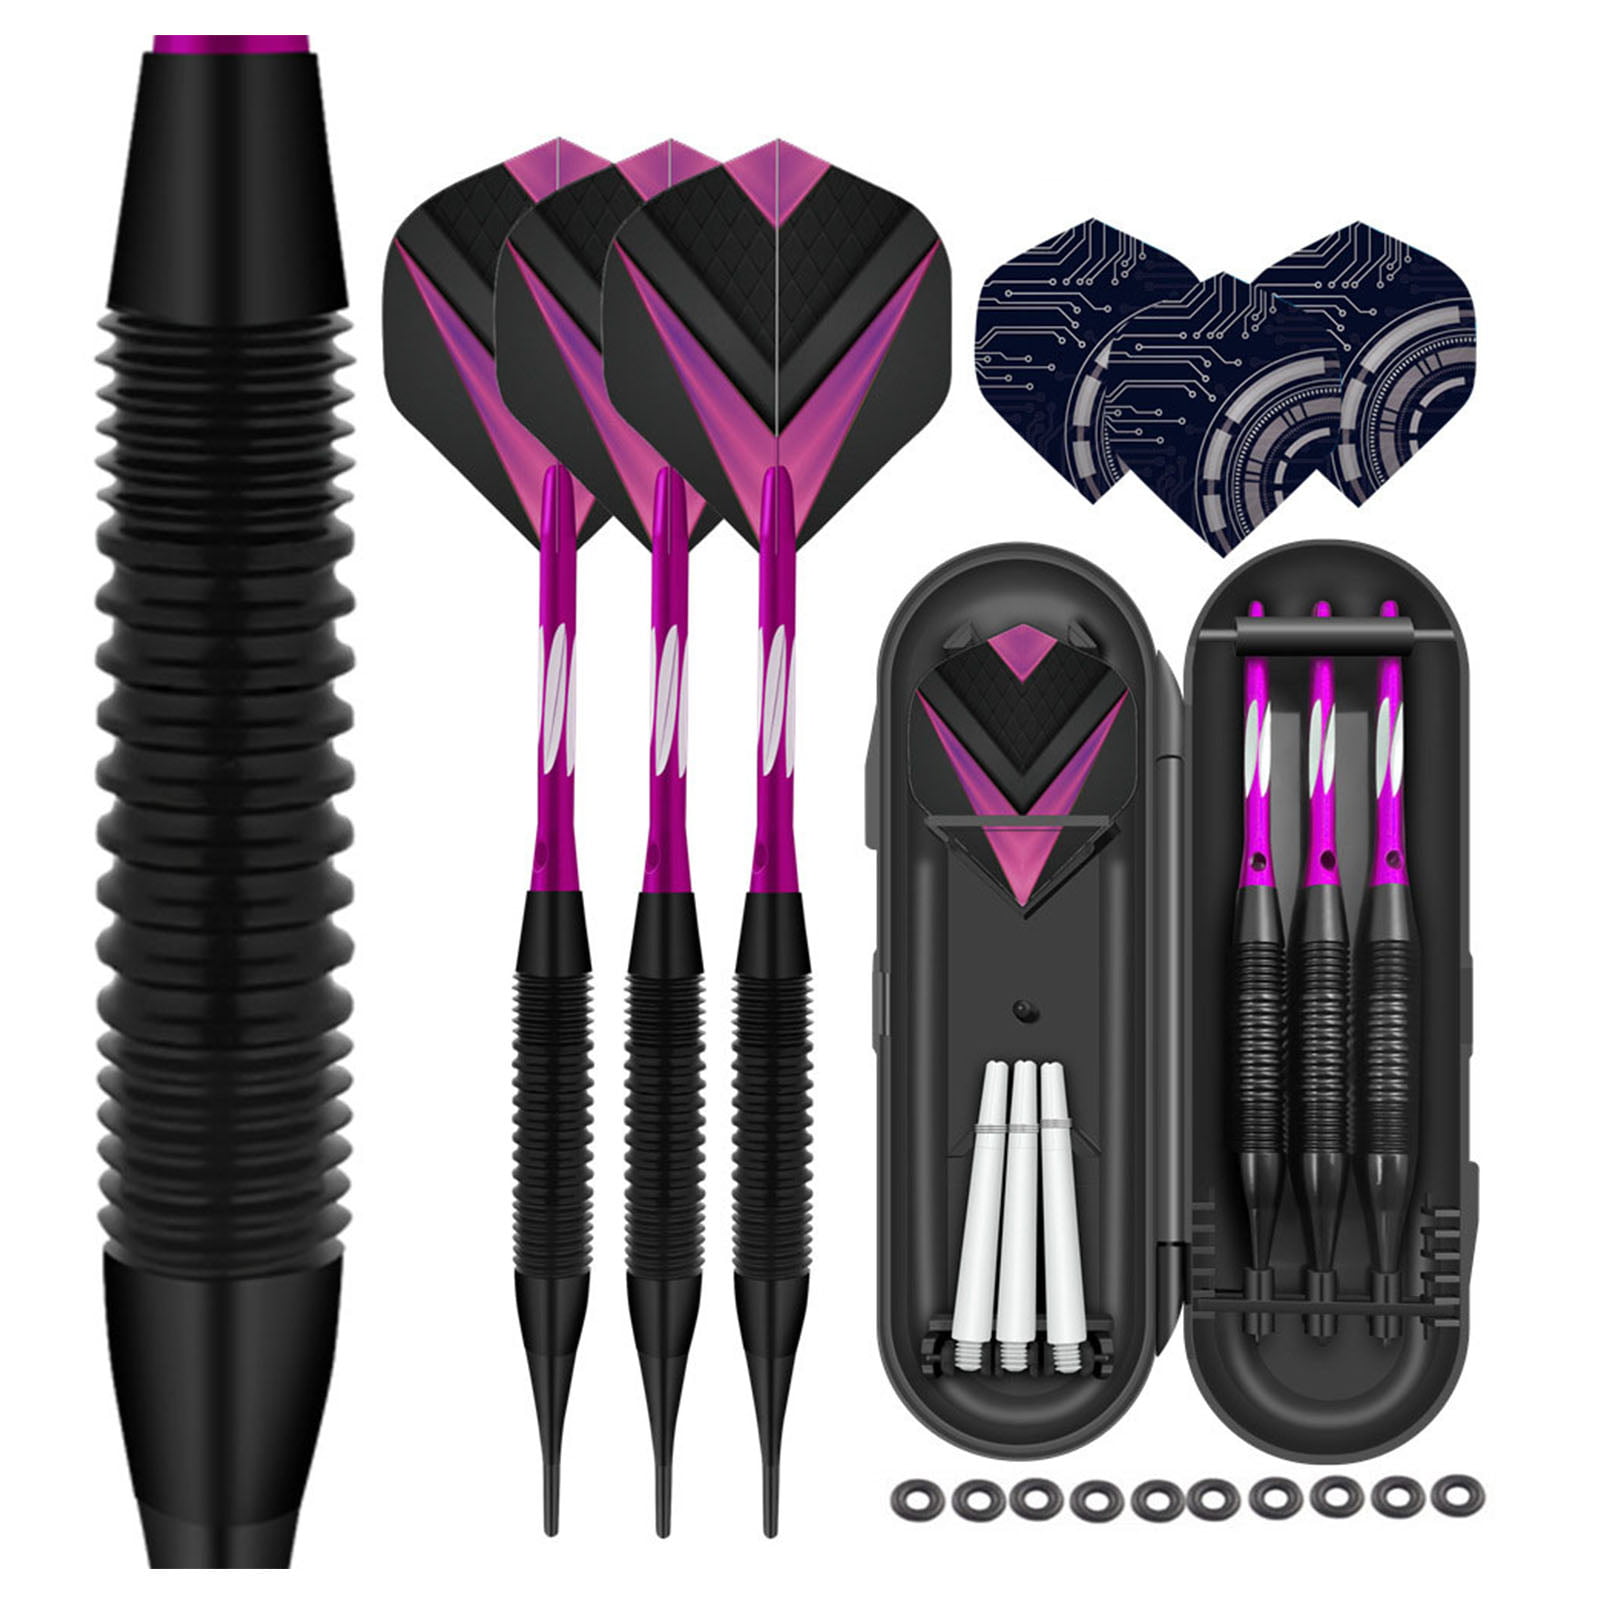 3Pcs Darts Set With 3Pcs Extra Flights & 1 Case Ideal Gift For Darts Fans Sports 